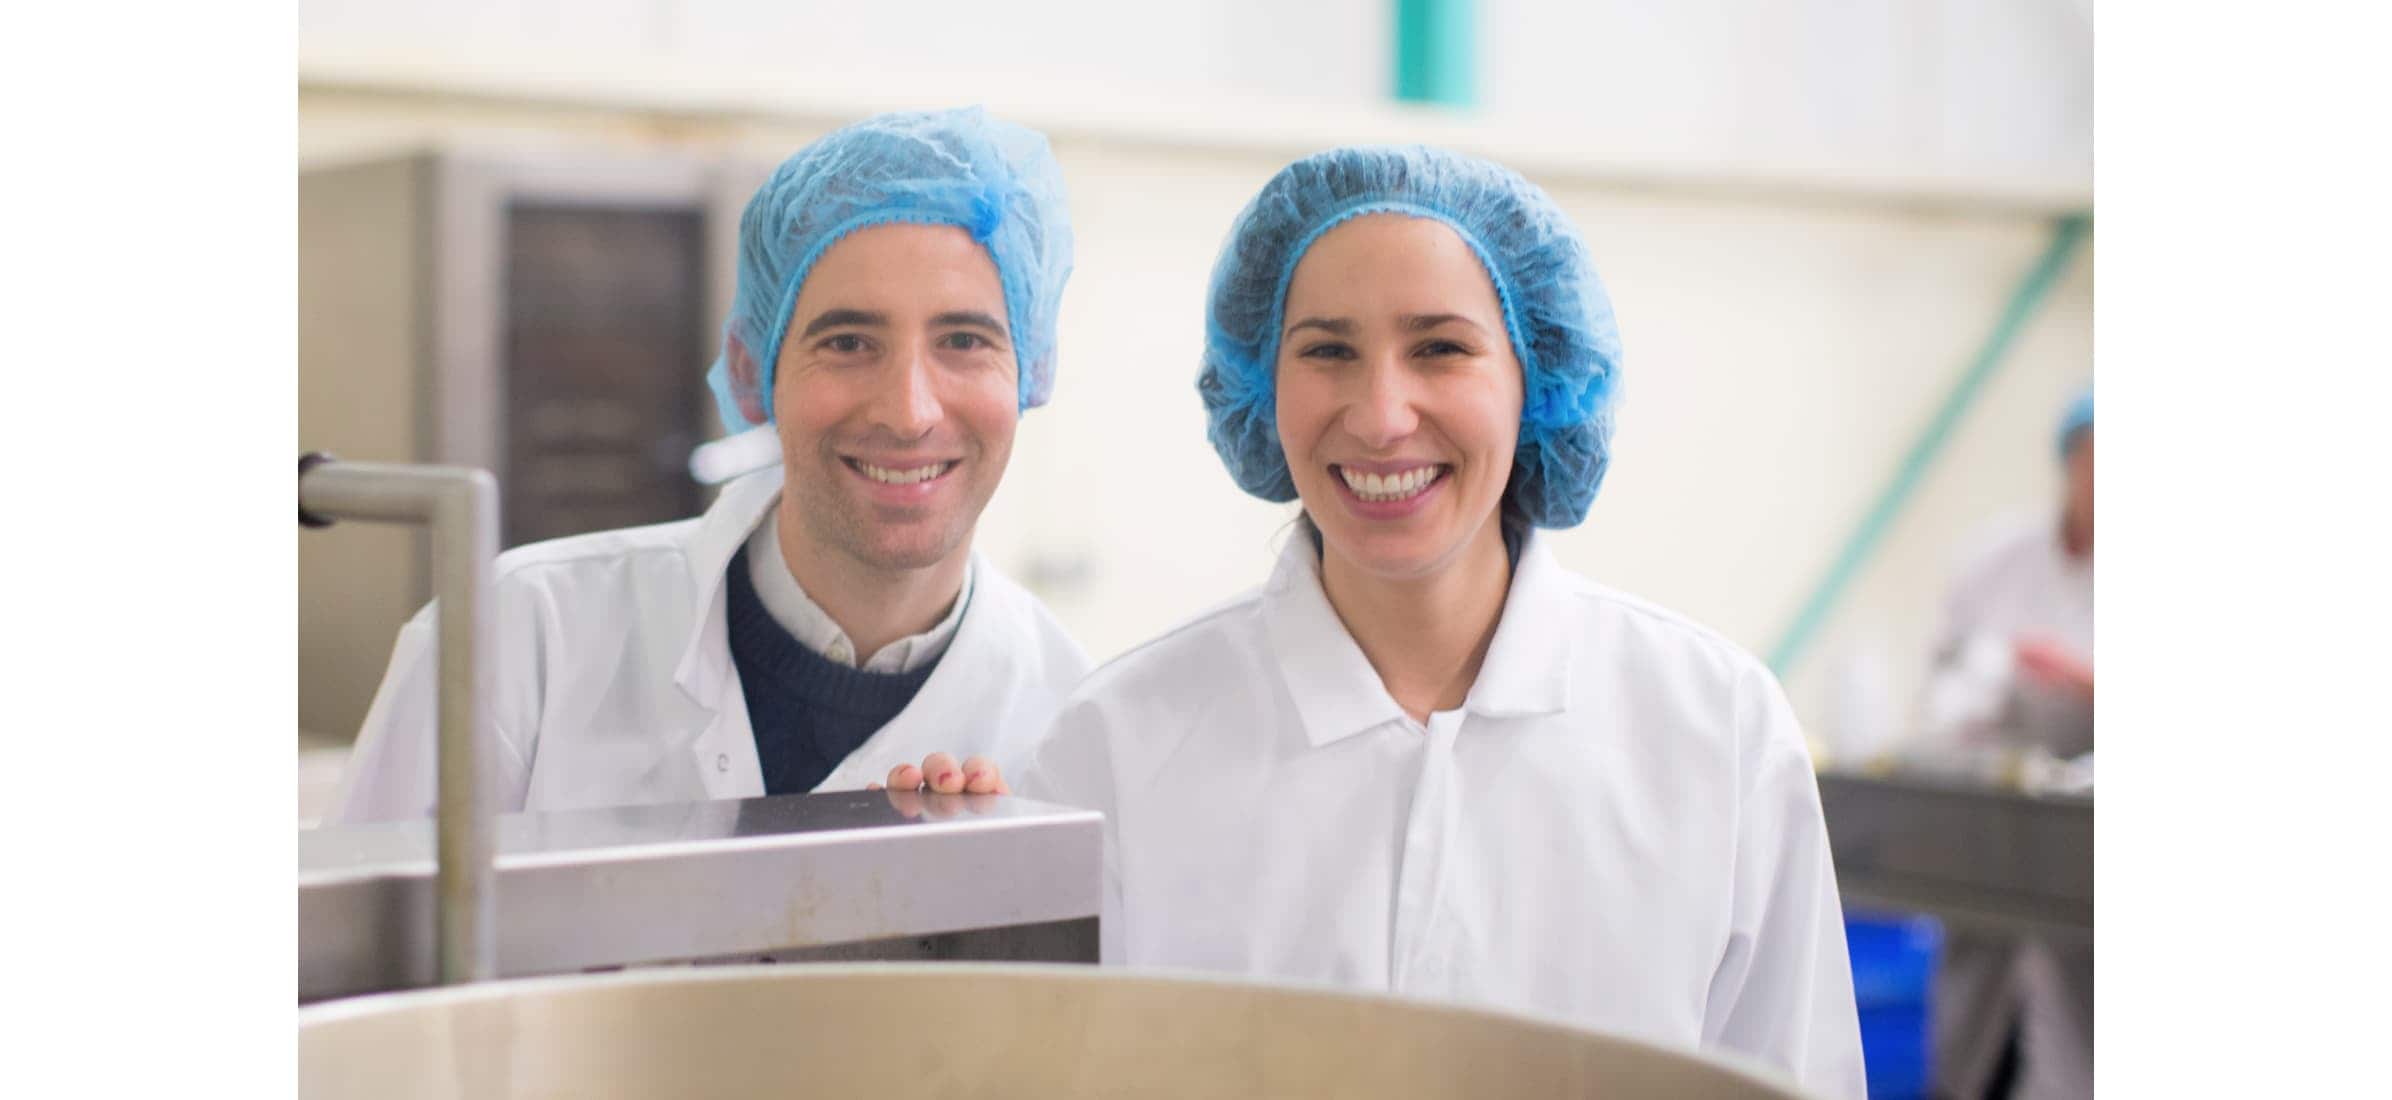 Co-founders of Popcorn Shed Laura Jackson and Sam Feller standing in an industrial kitchen wearing safety clothing.